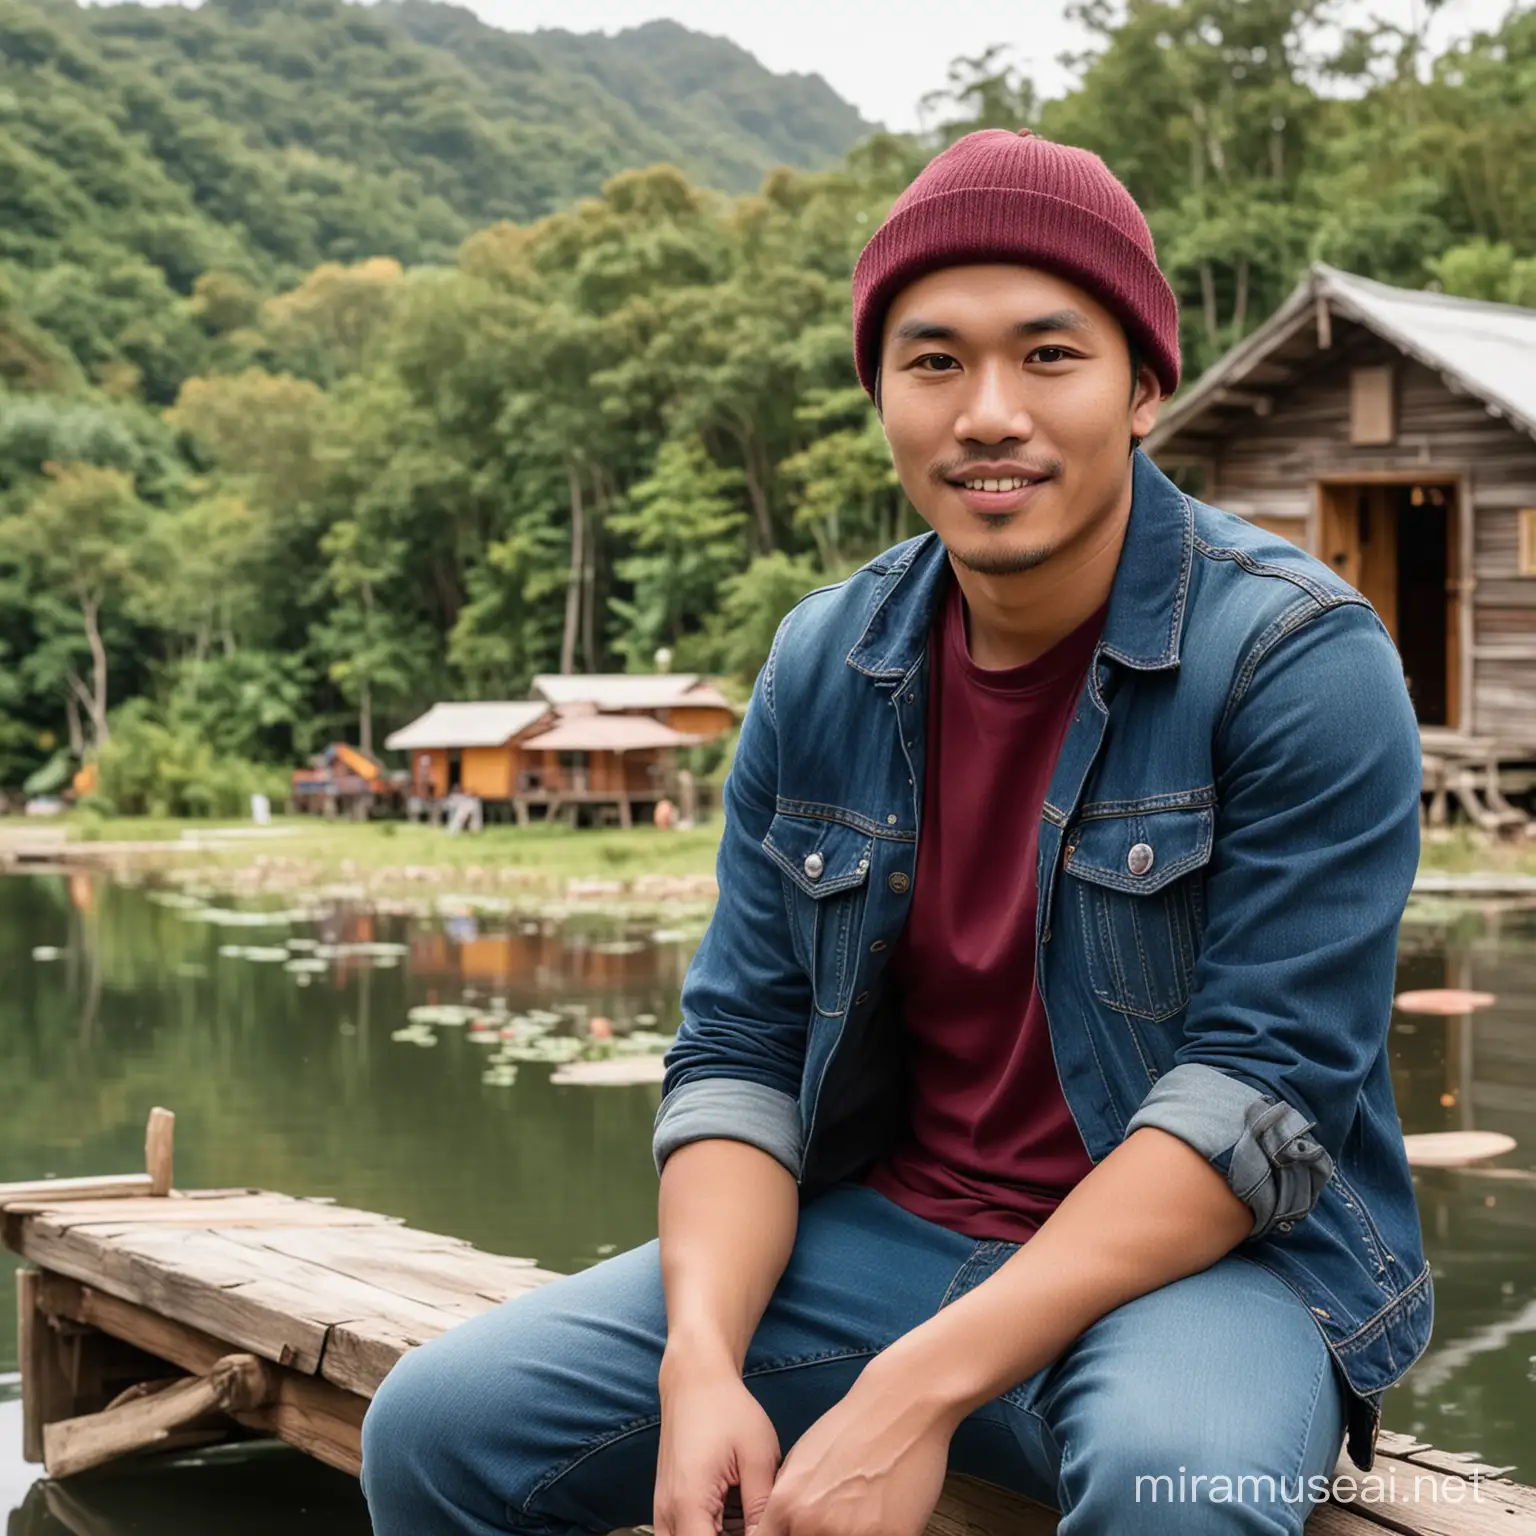 Friendly Asian Man in LeafRoofed Hut with Colorful Sampans